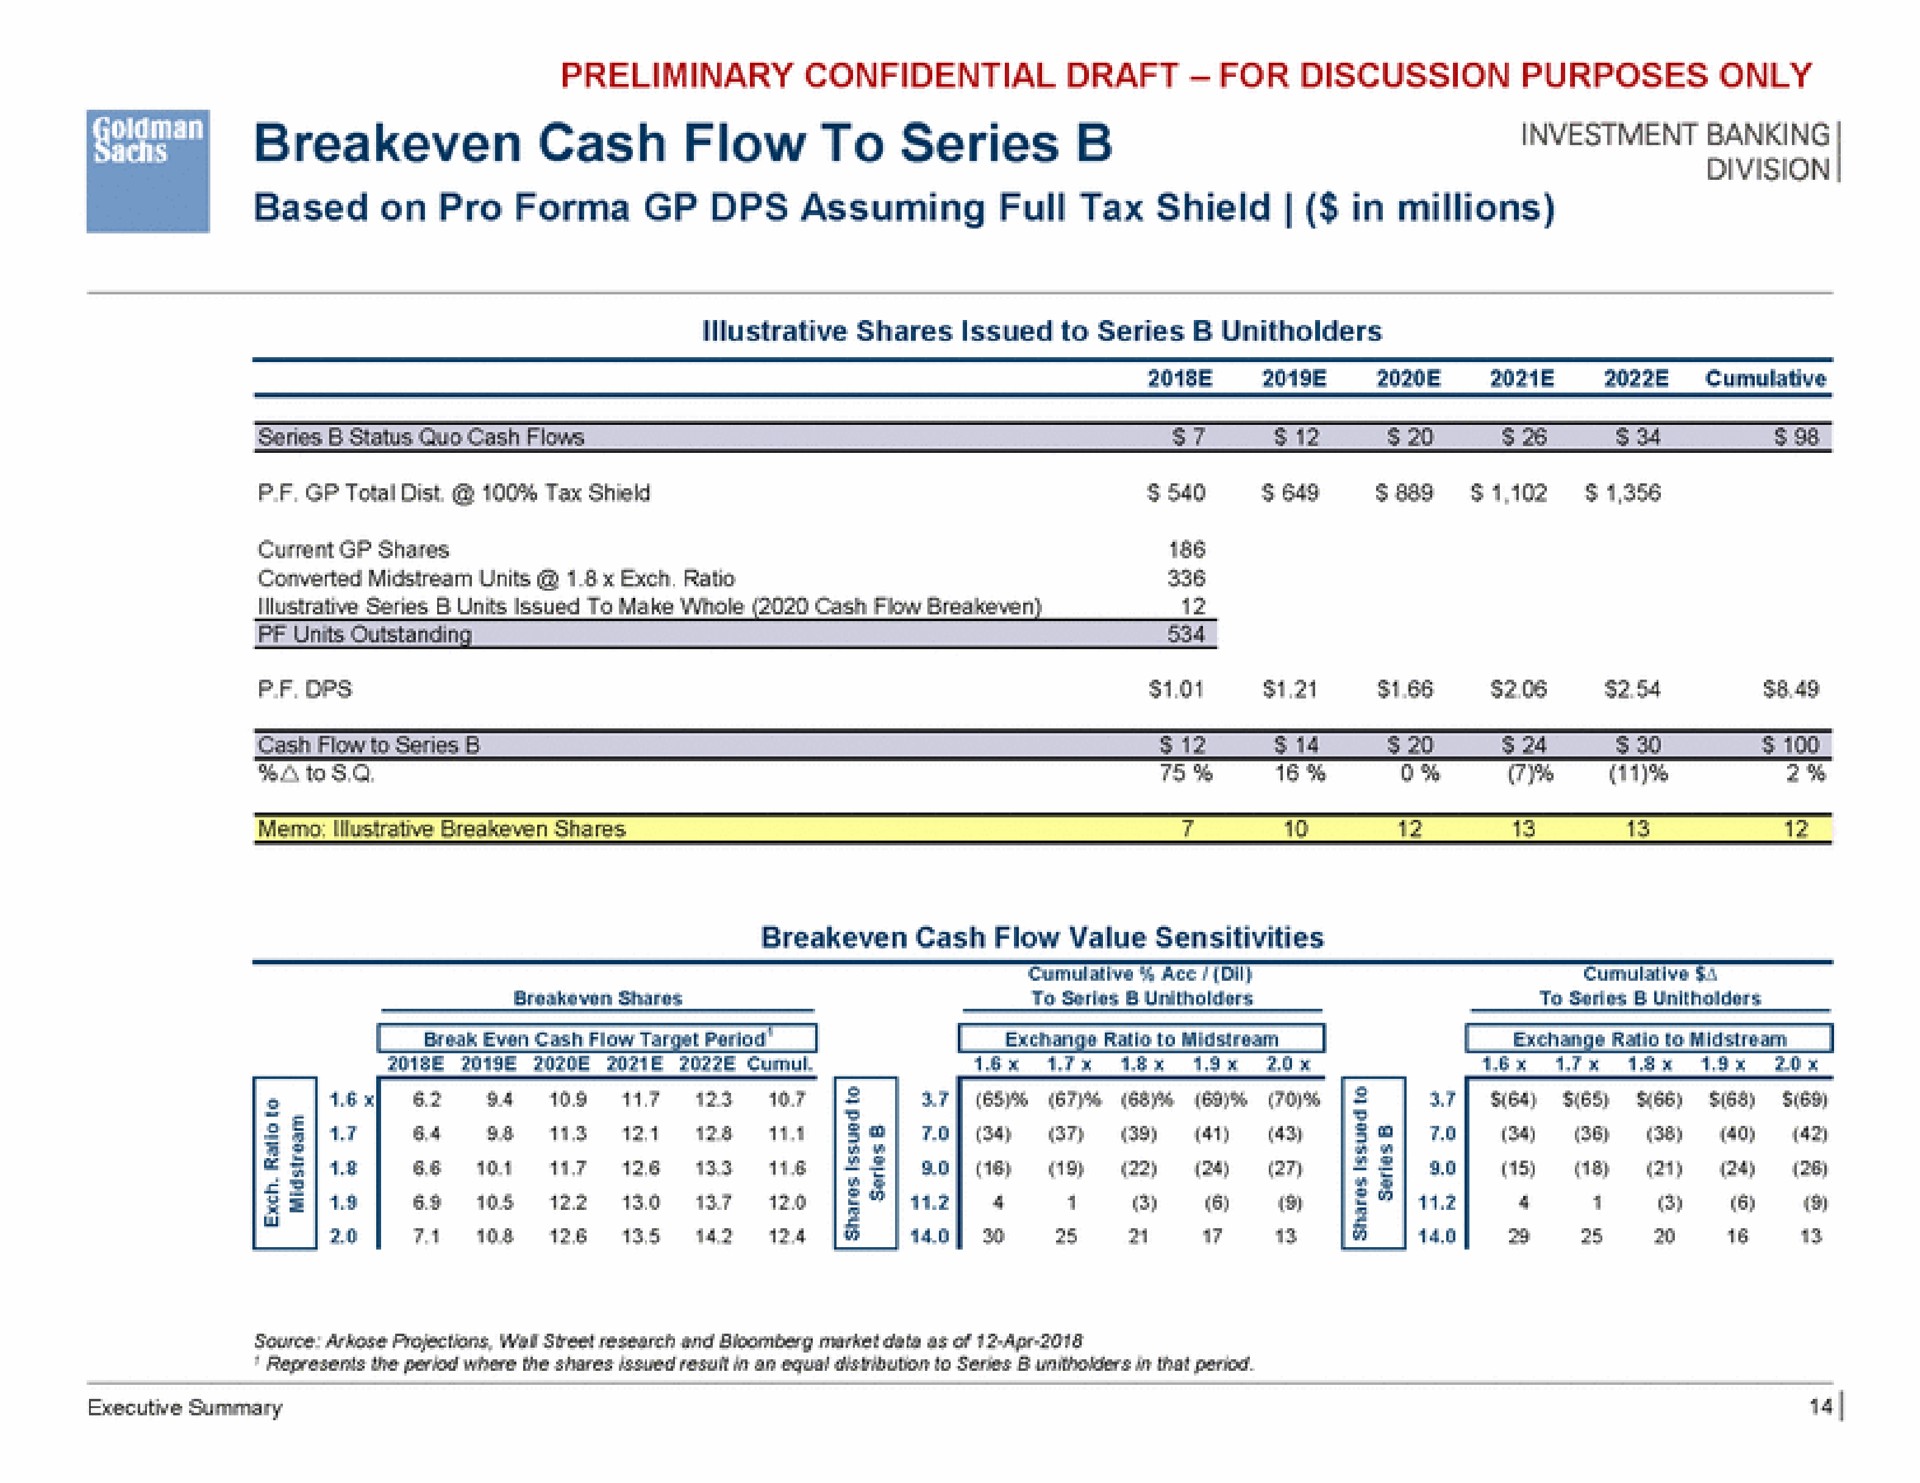 investment see cash flow to series | Goldman Sachs